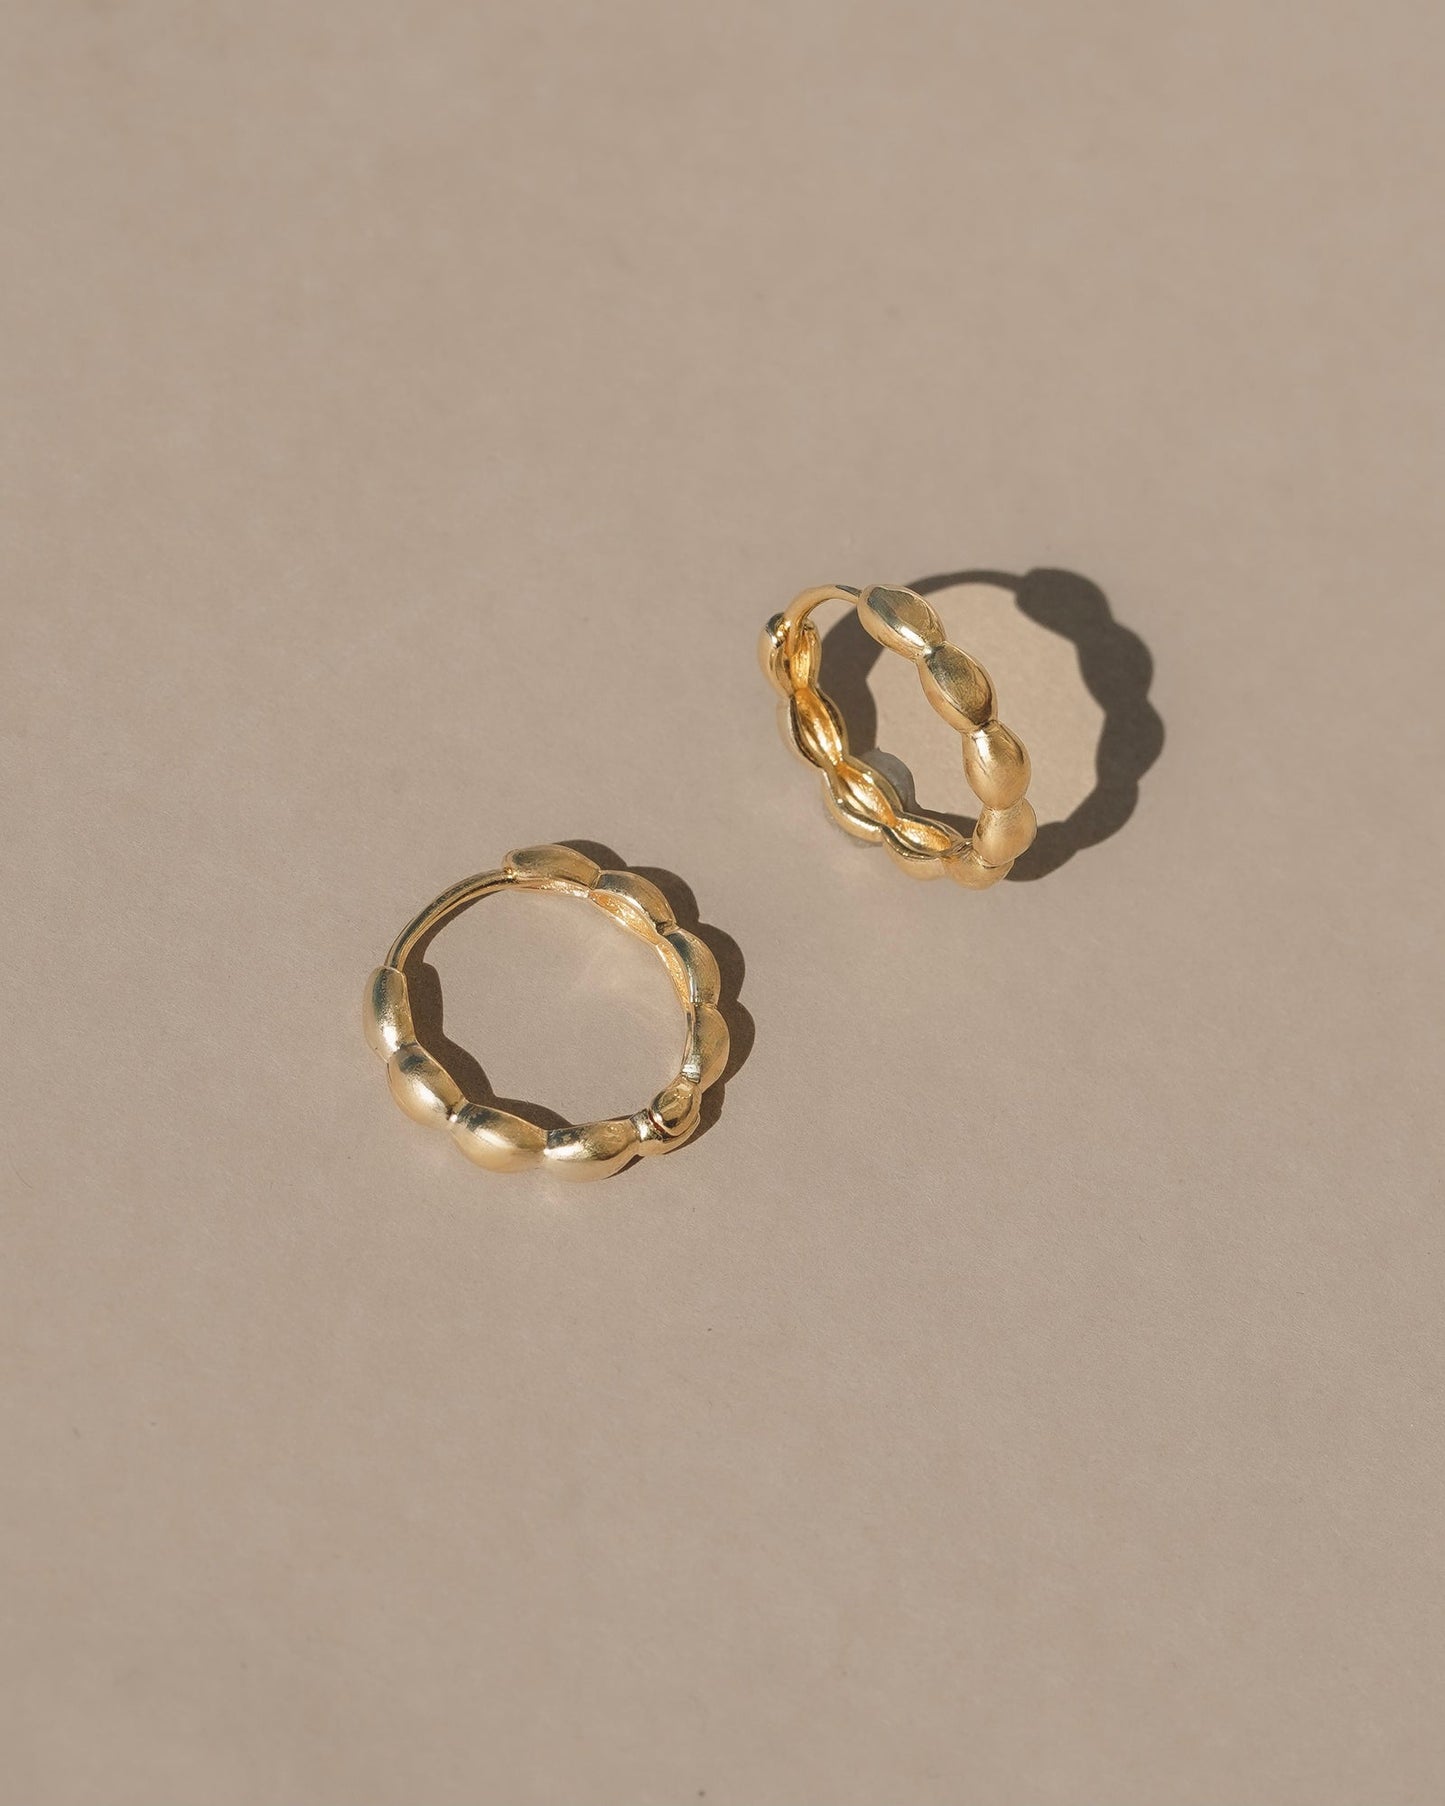 14k gold vermeil petal earrings / Simple floral inspired hollow hinged hoops, light weight every day comfort and organic ease.  Handmade in the Santa Cruz mountains.